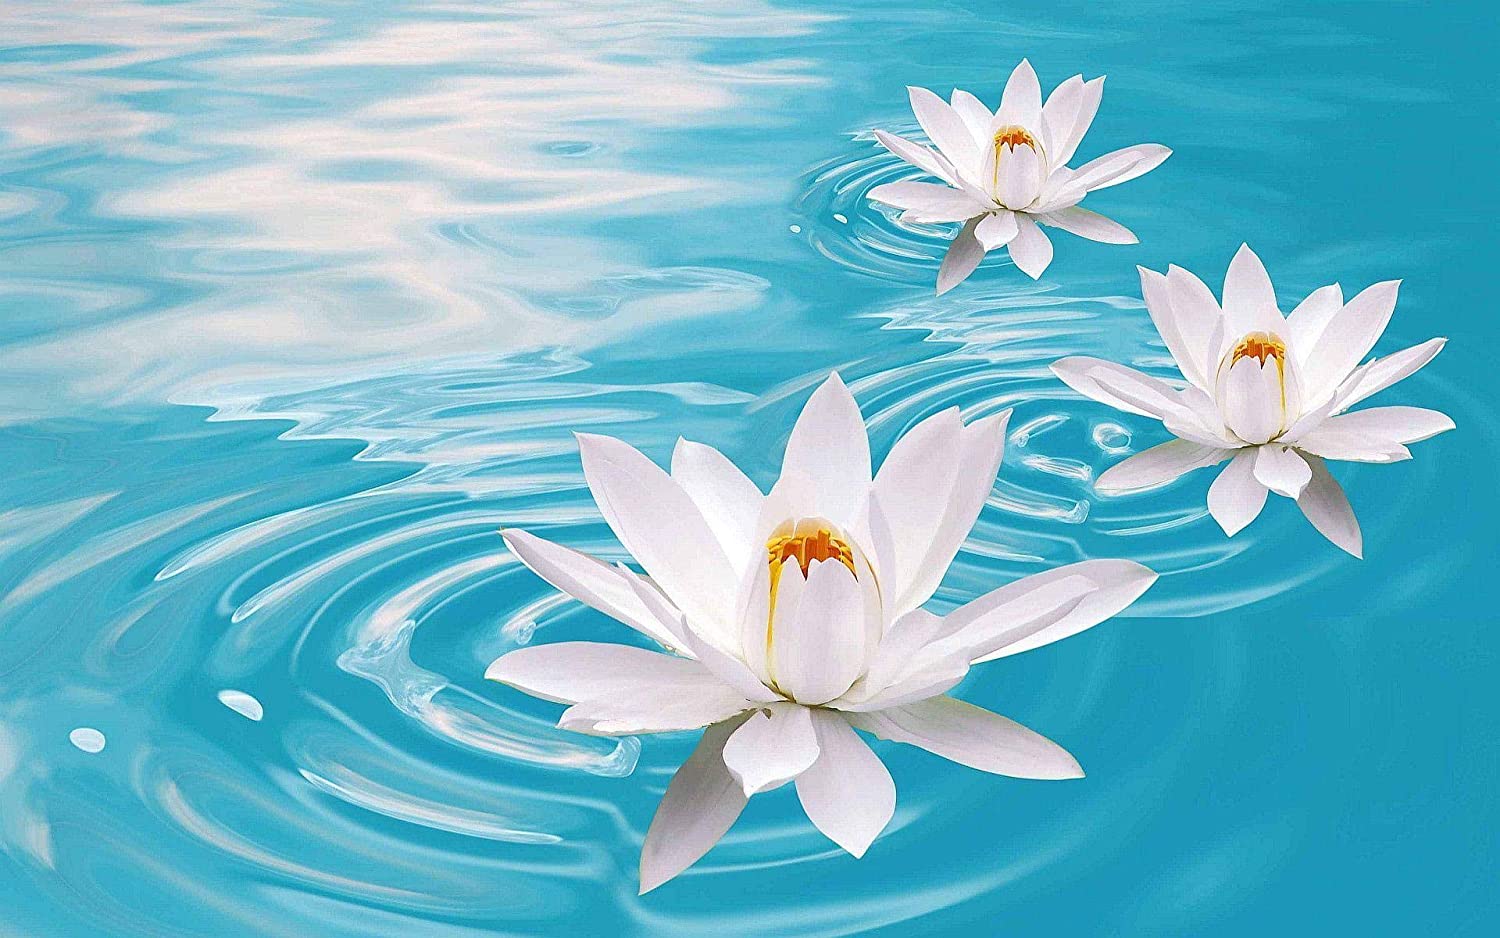 Buy Avikalp Exclusive Awi3368 White Lotus Flower Full HD Wallpaper (91cm x 60cm) Online at Low Prices in India